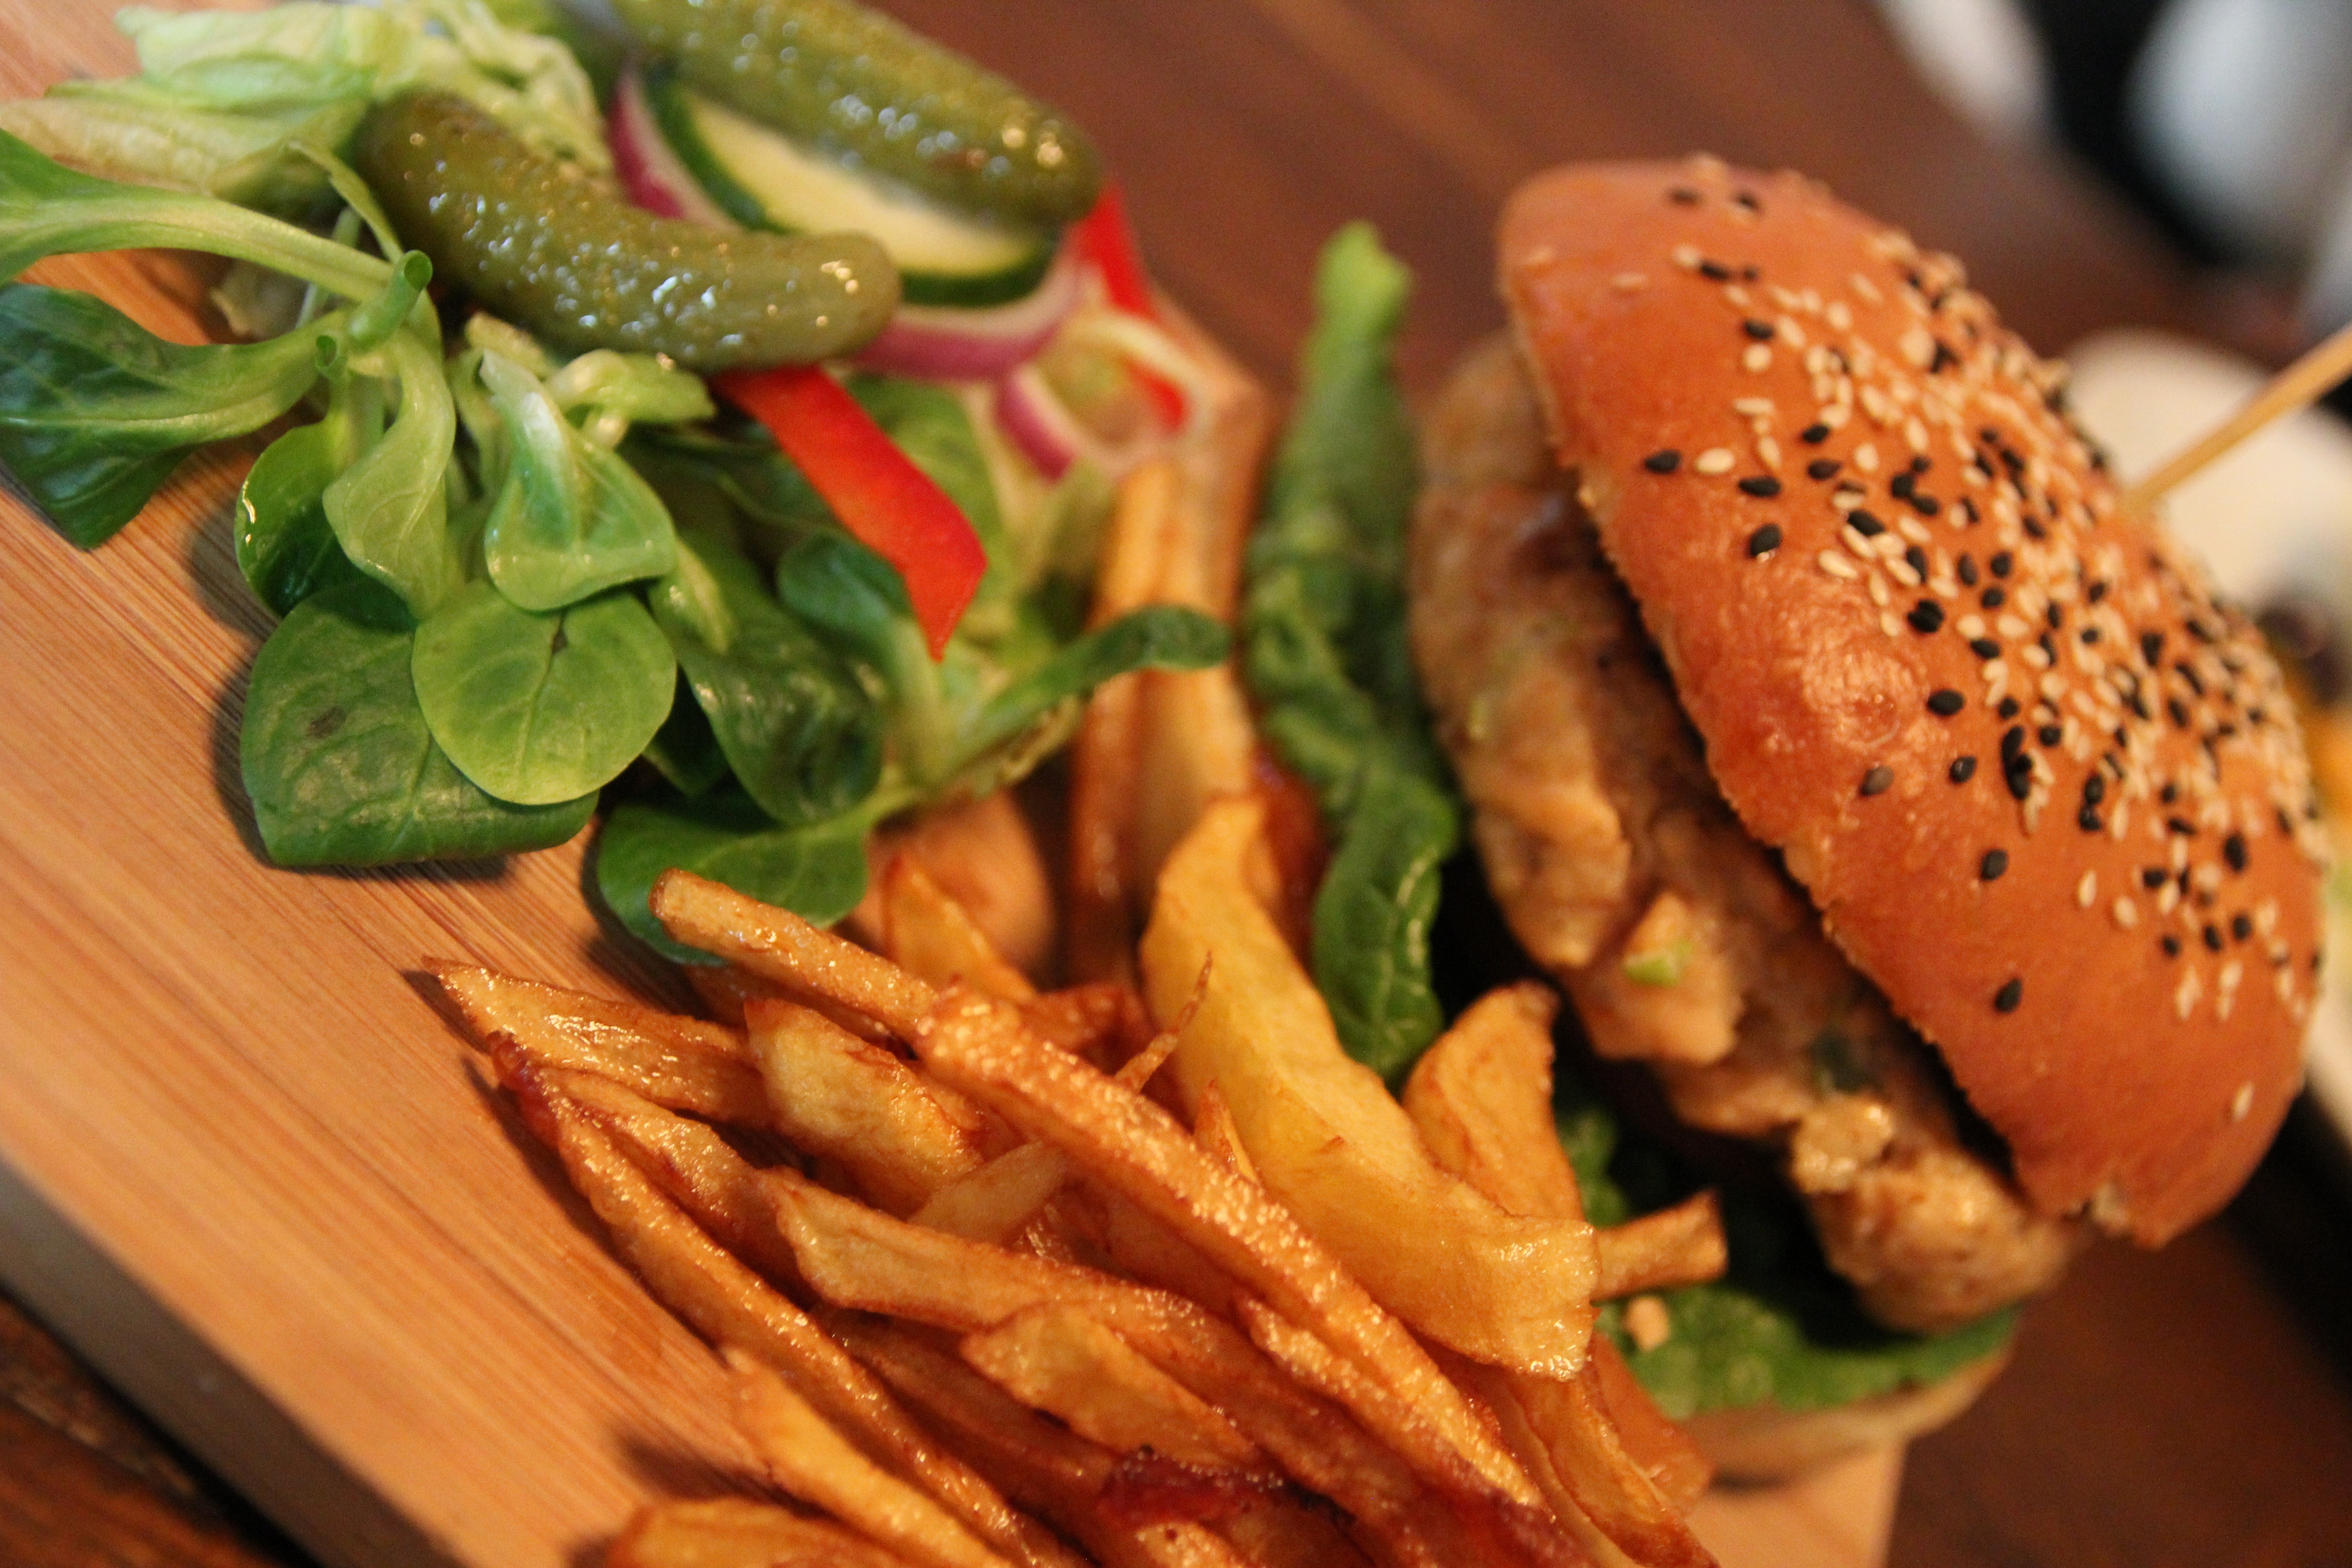 hamburger, french fries and green leaf vegetable